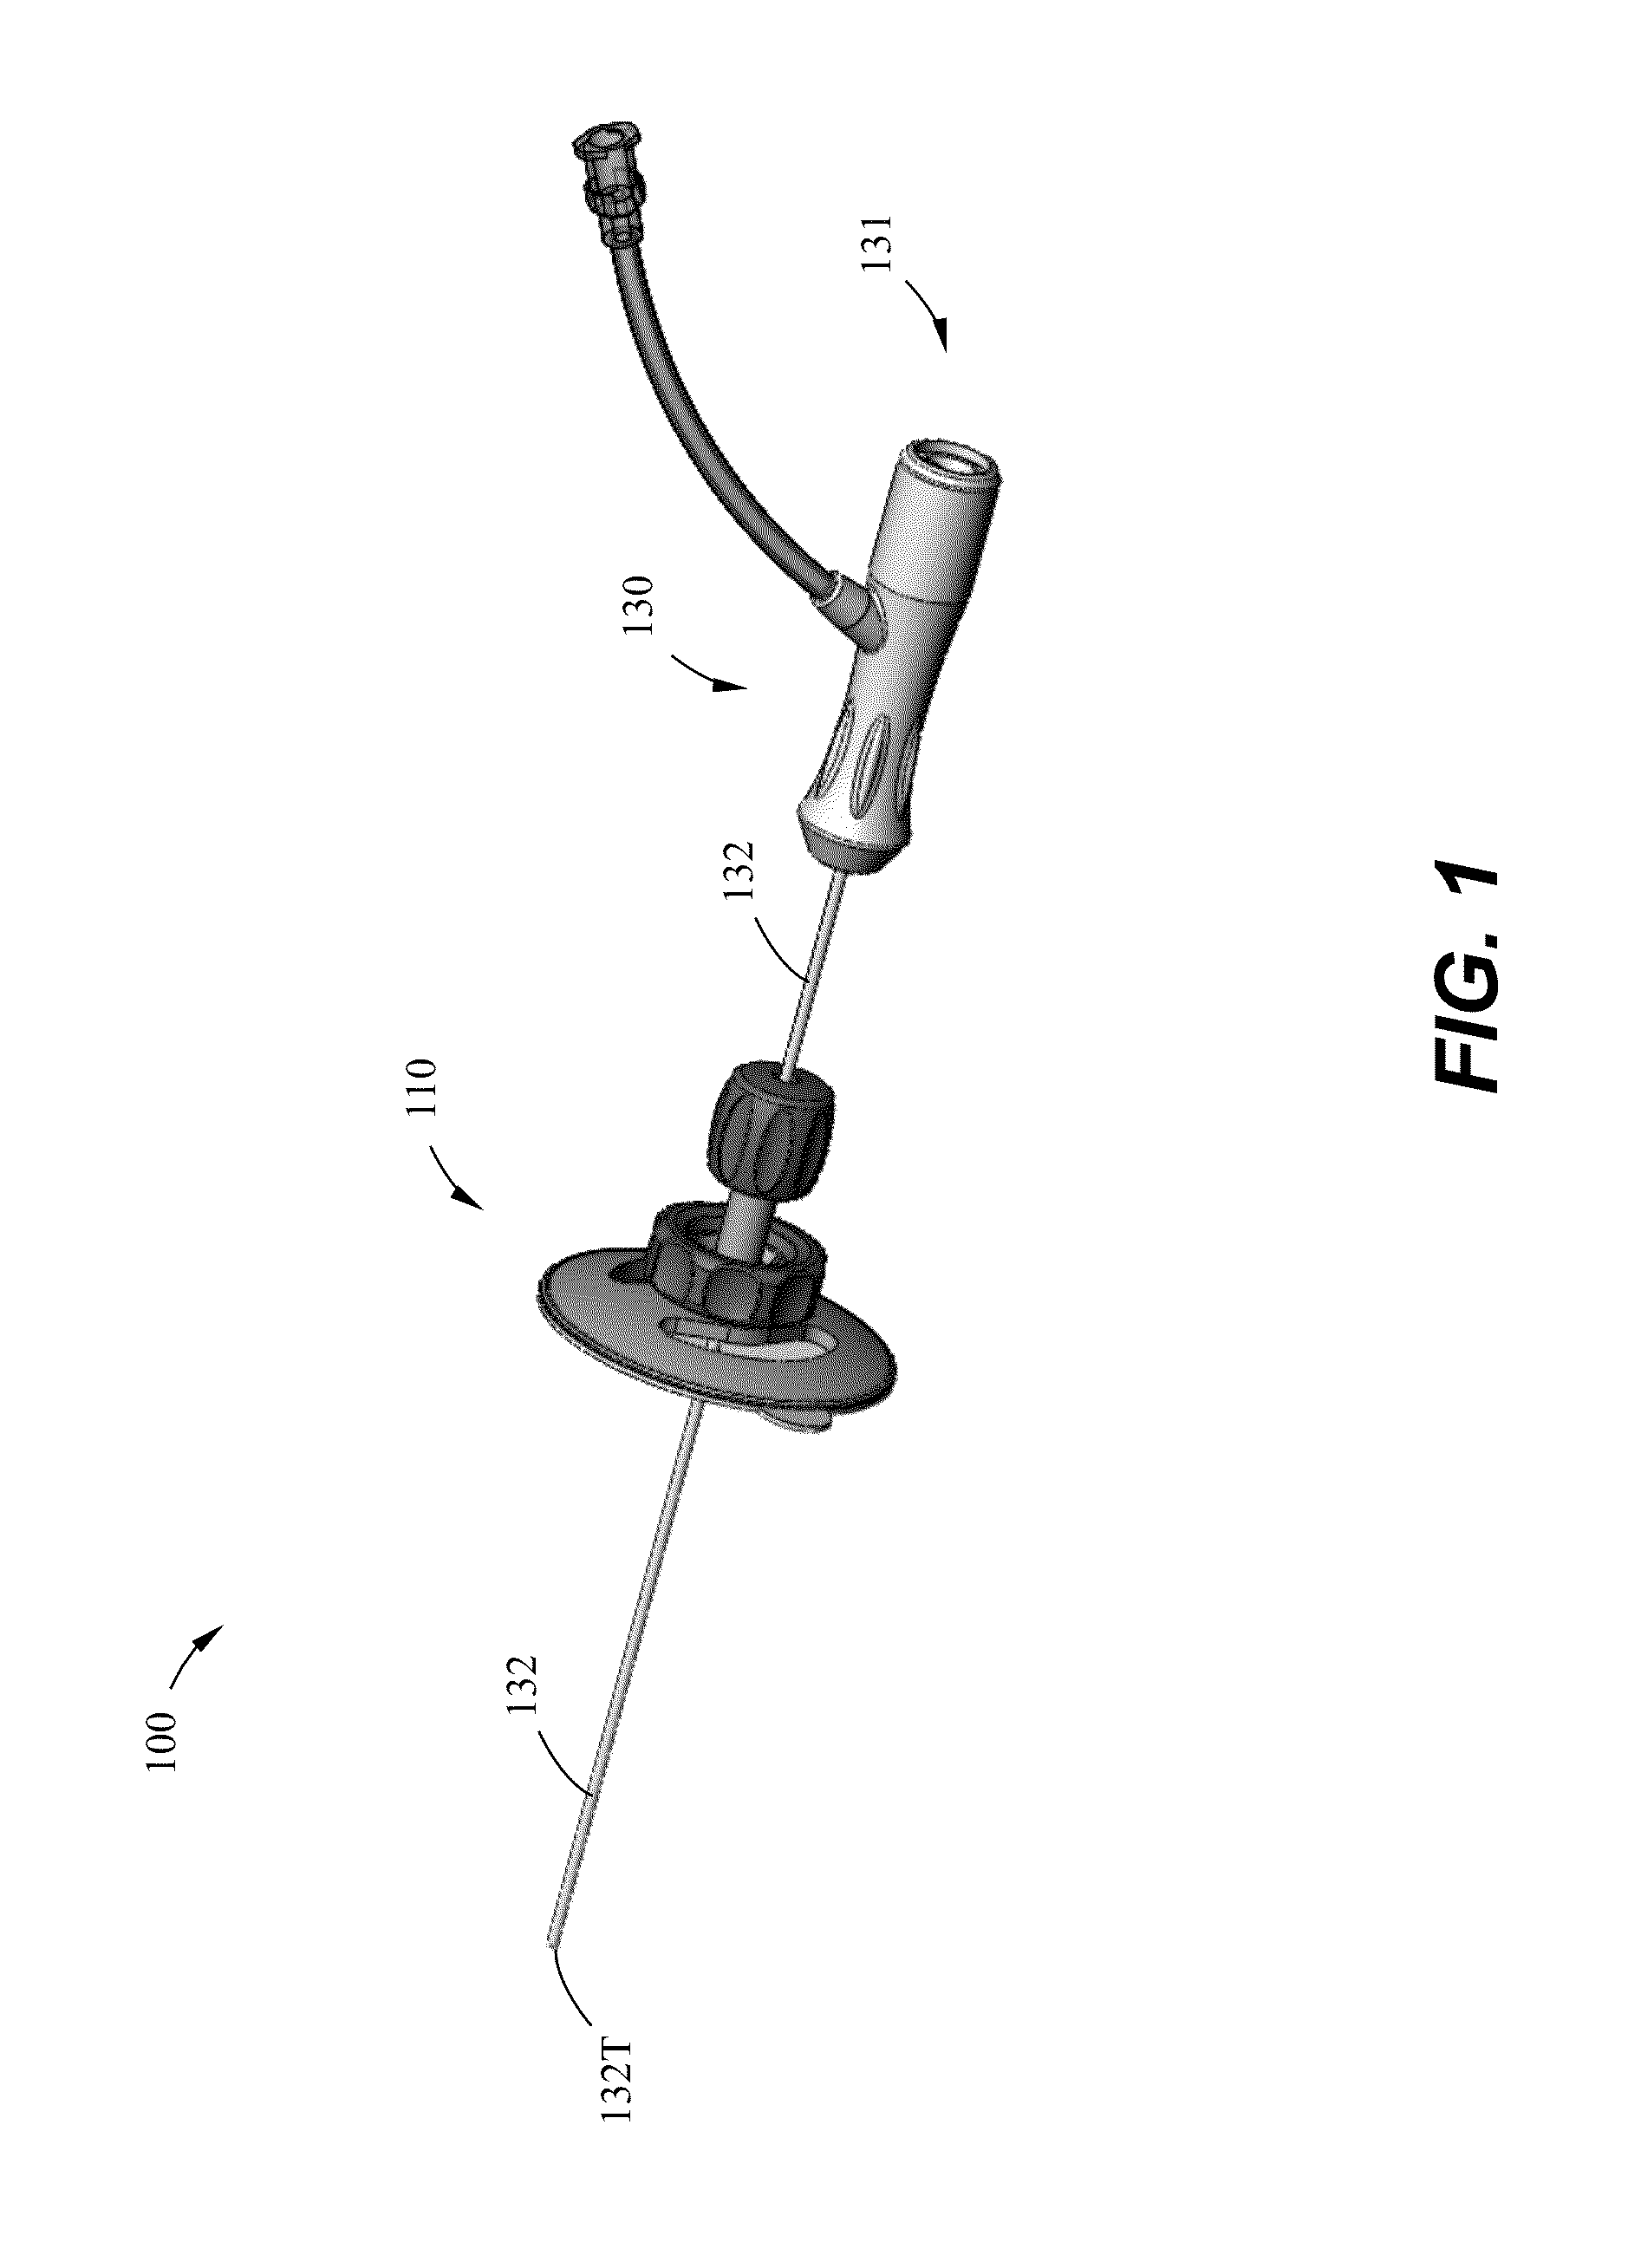 Devices and methods for obtaining tissue samples